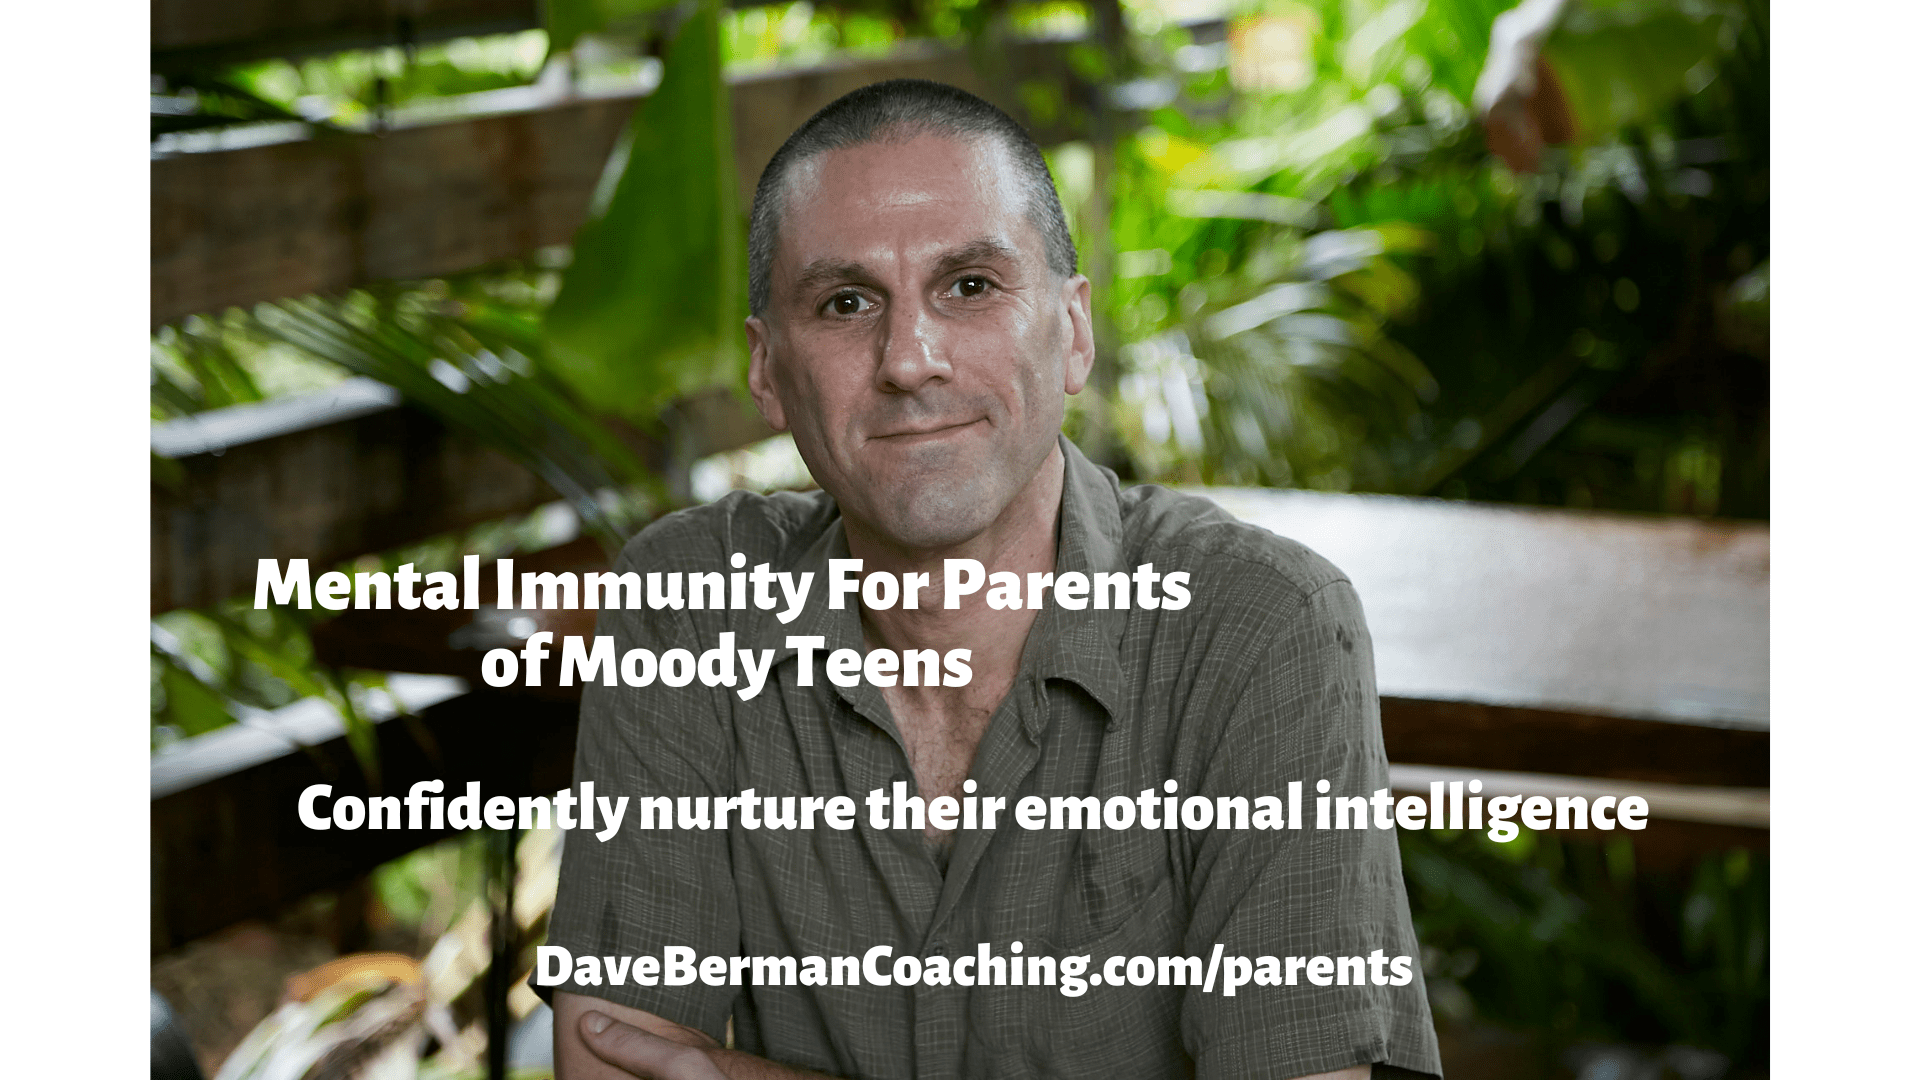 Dave Berman sits in the jungle with a slight smile and his arms folded. Words read: Mental Immunity For Parents of Moody Teens. Confidently nurture their emotional intelligence. DaveBermanCoaching.com/parents